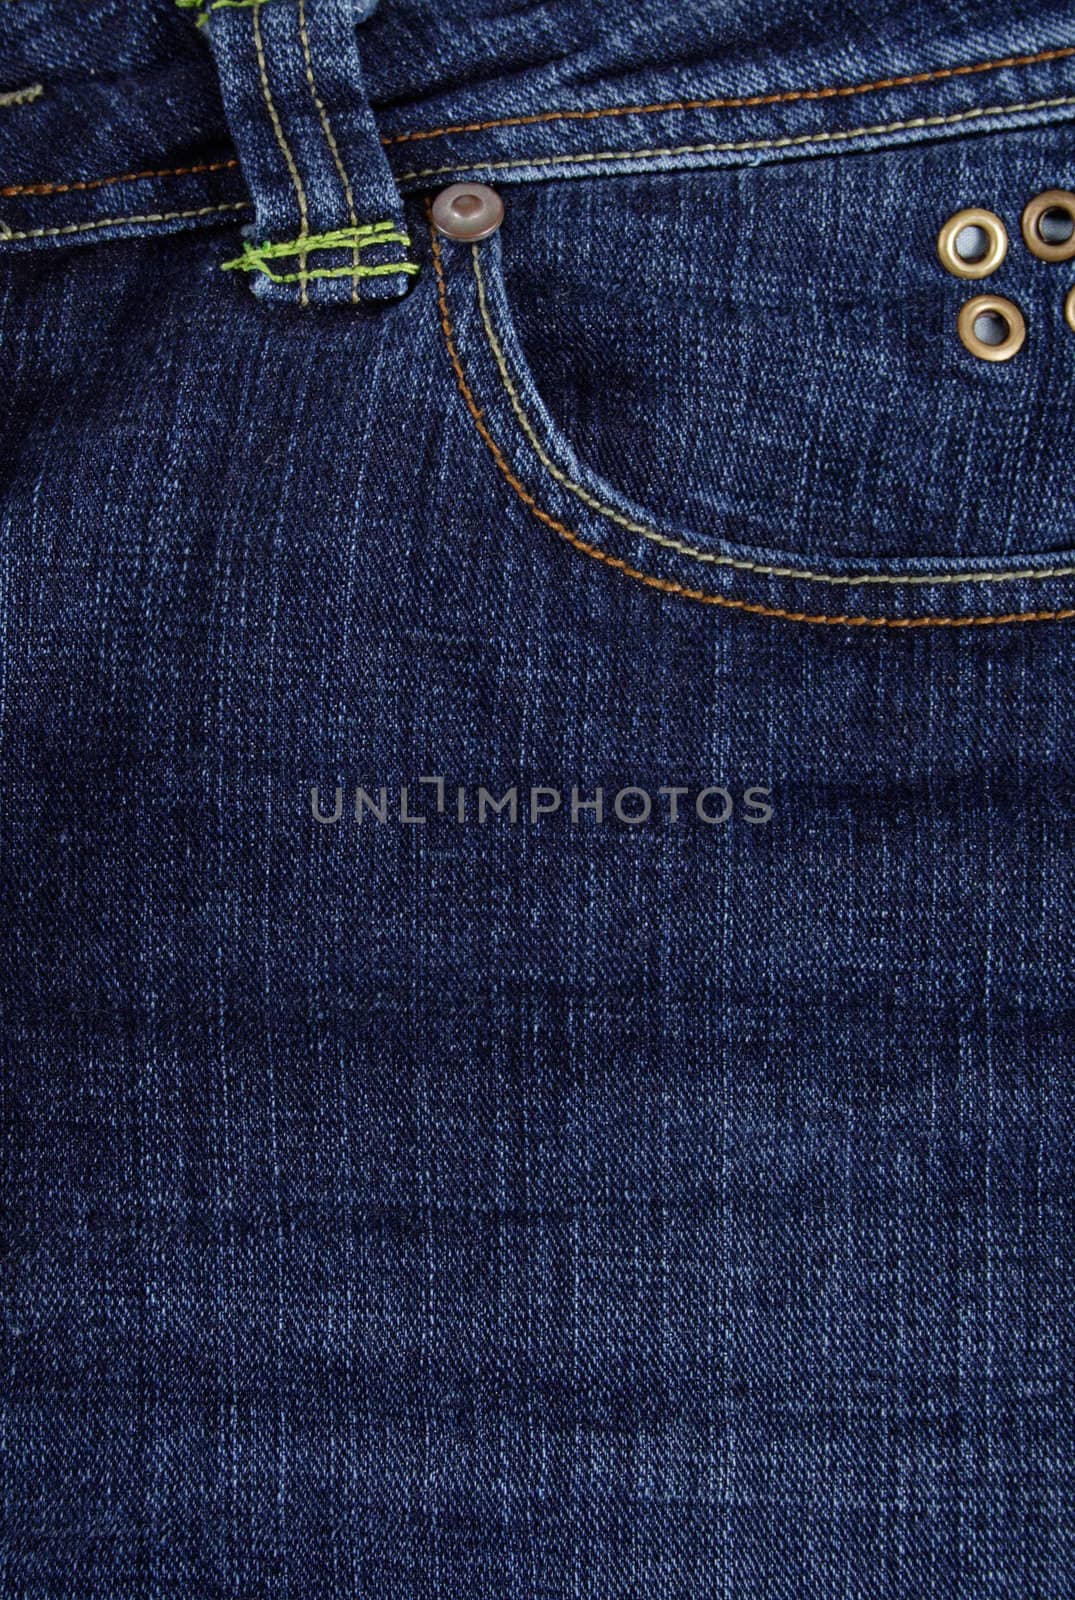 jeans background by aguirre_mar